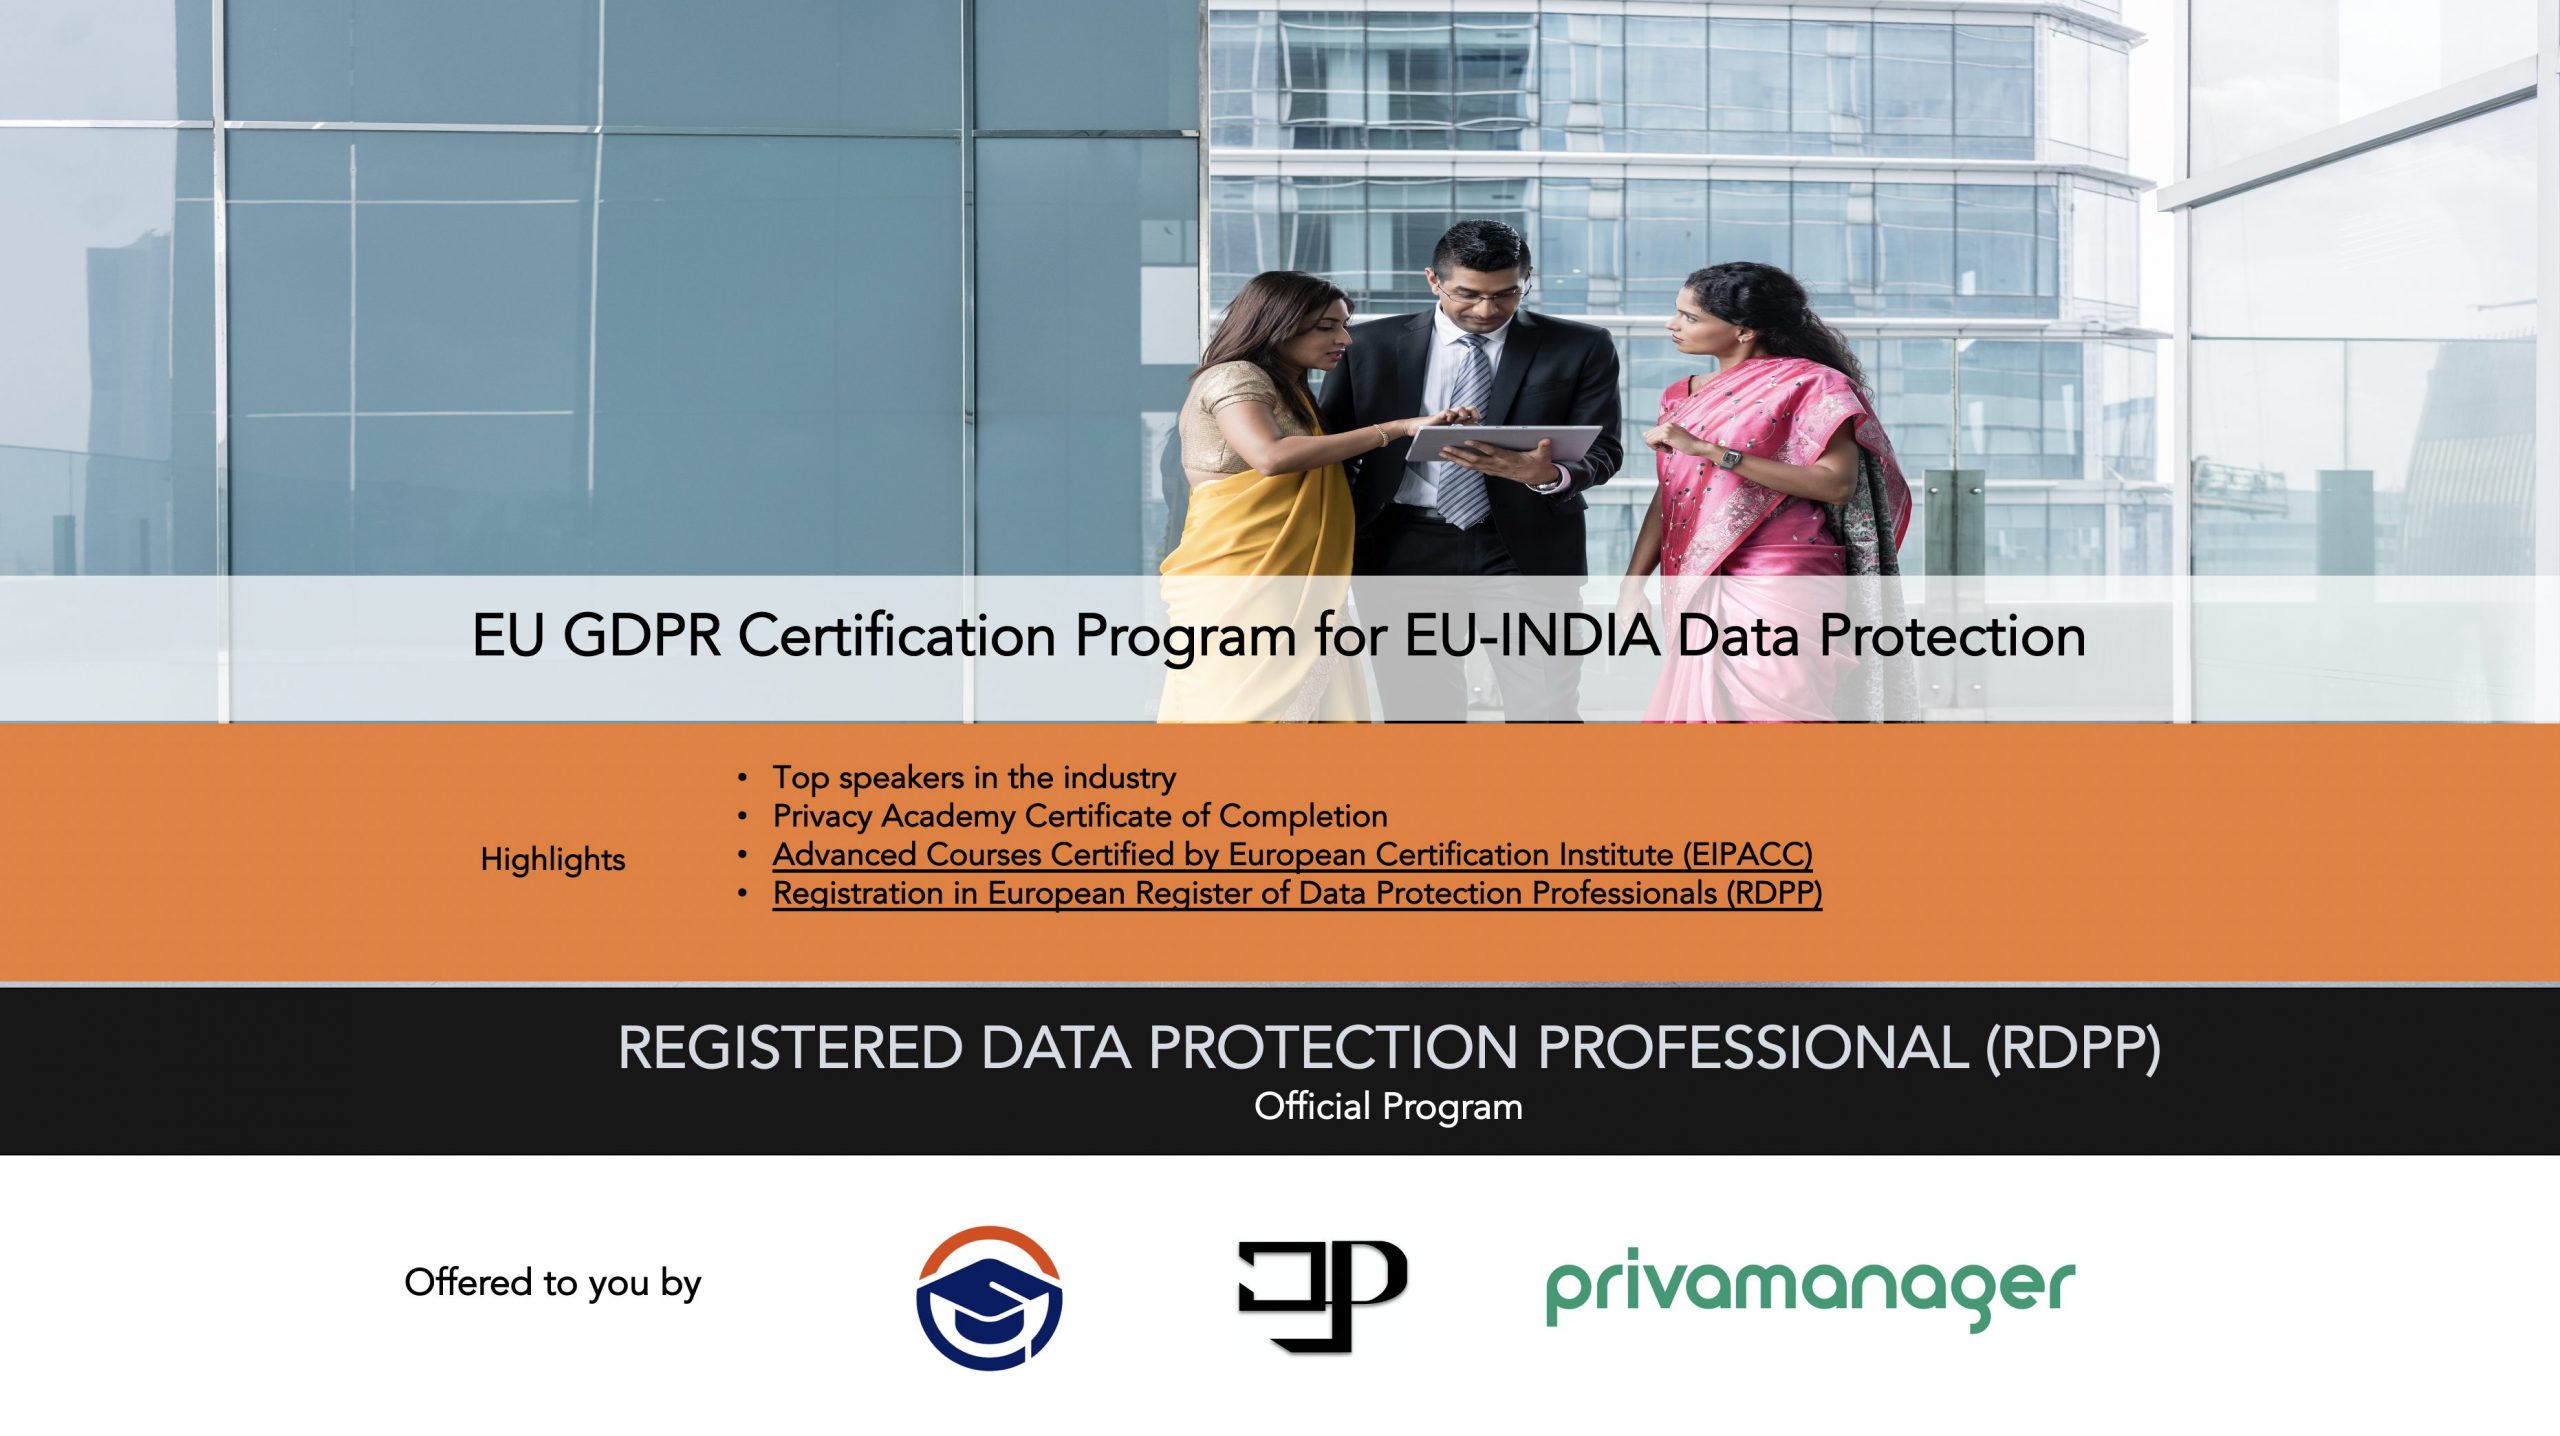 EU-INDIA Registered Data Protection Professional (RDPP) www.privacyconsultancyservices.com